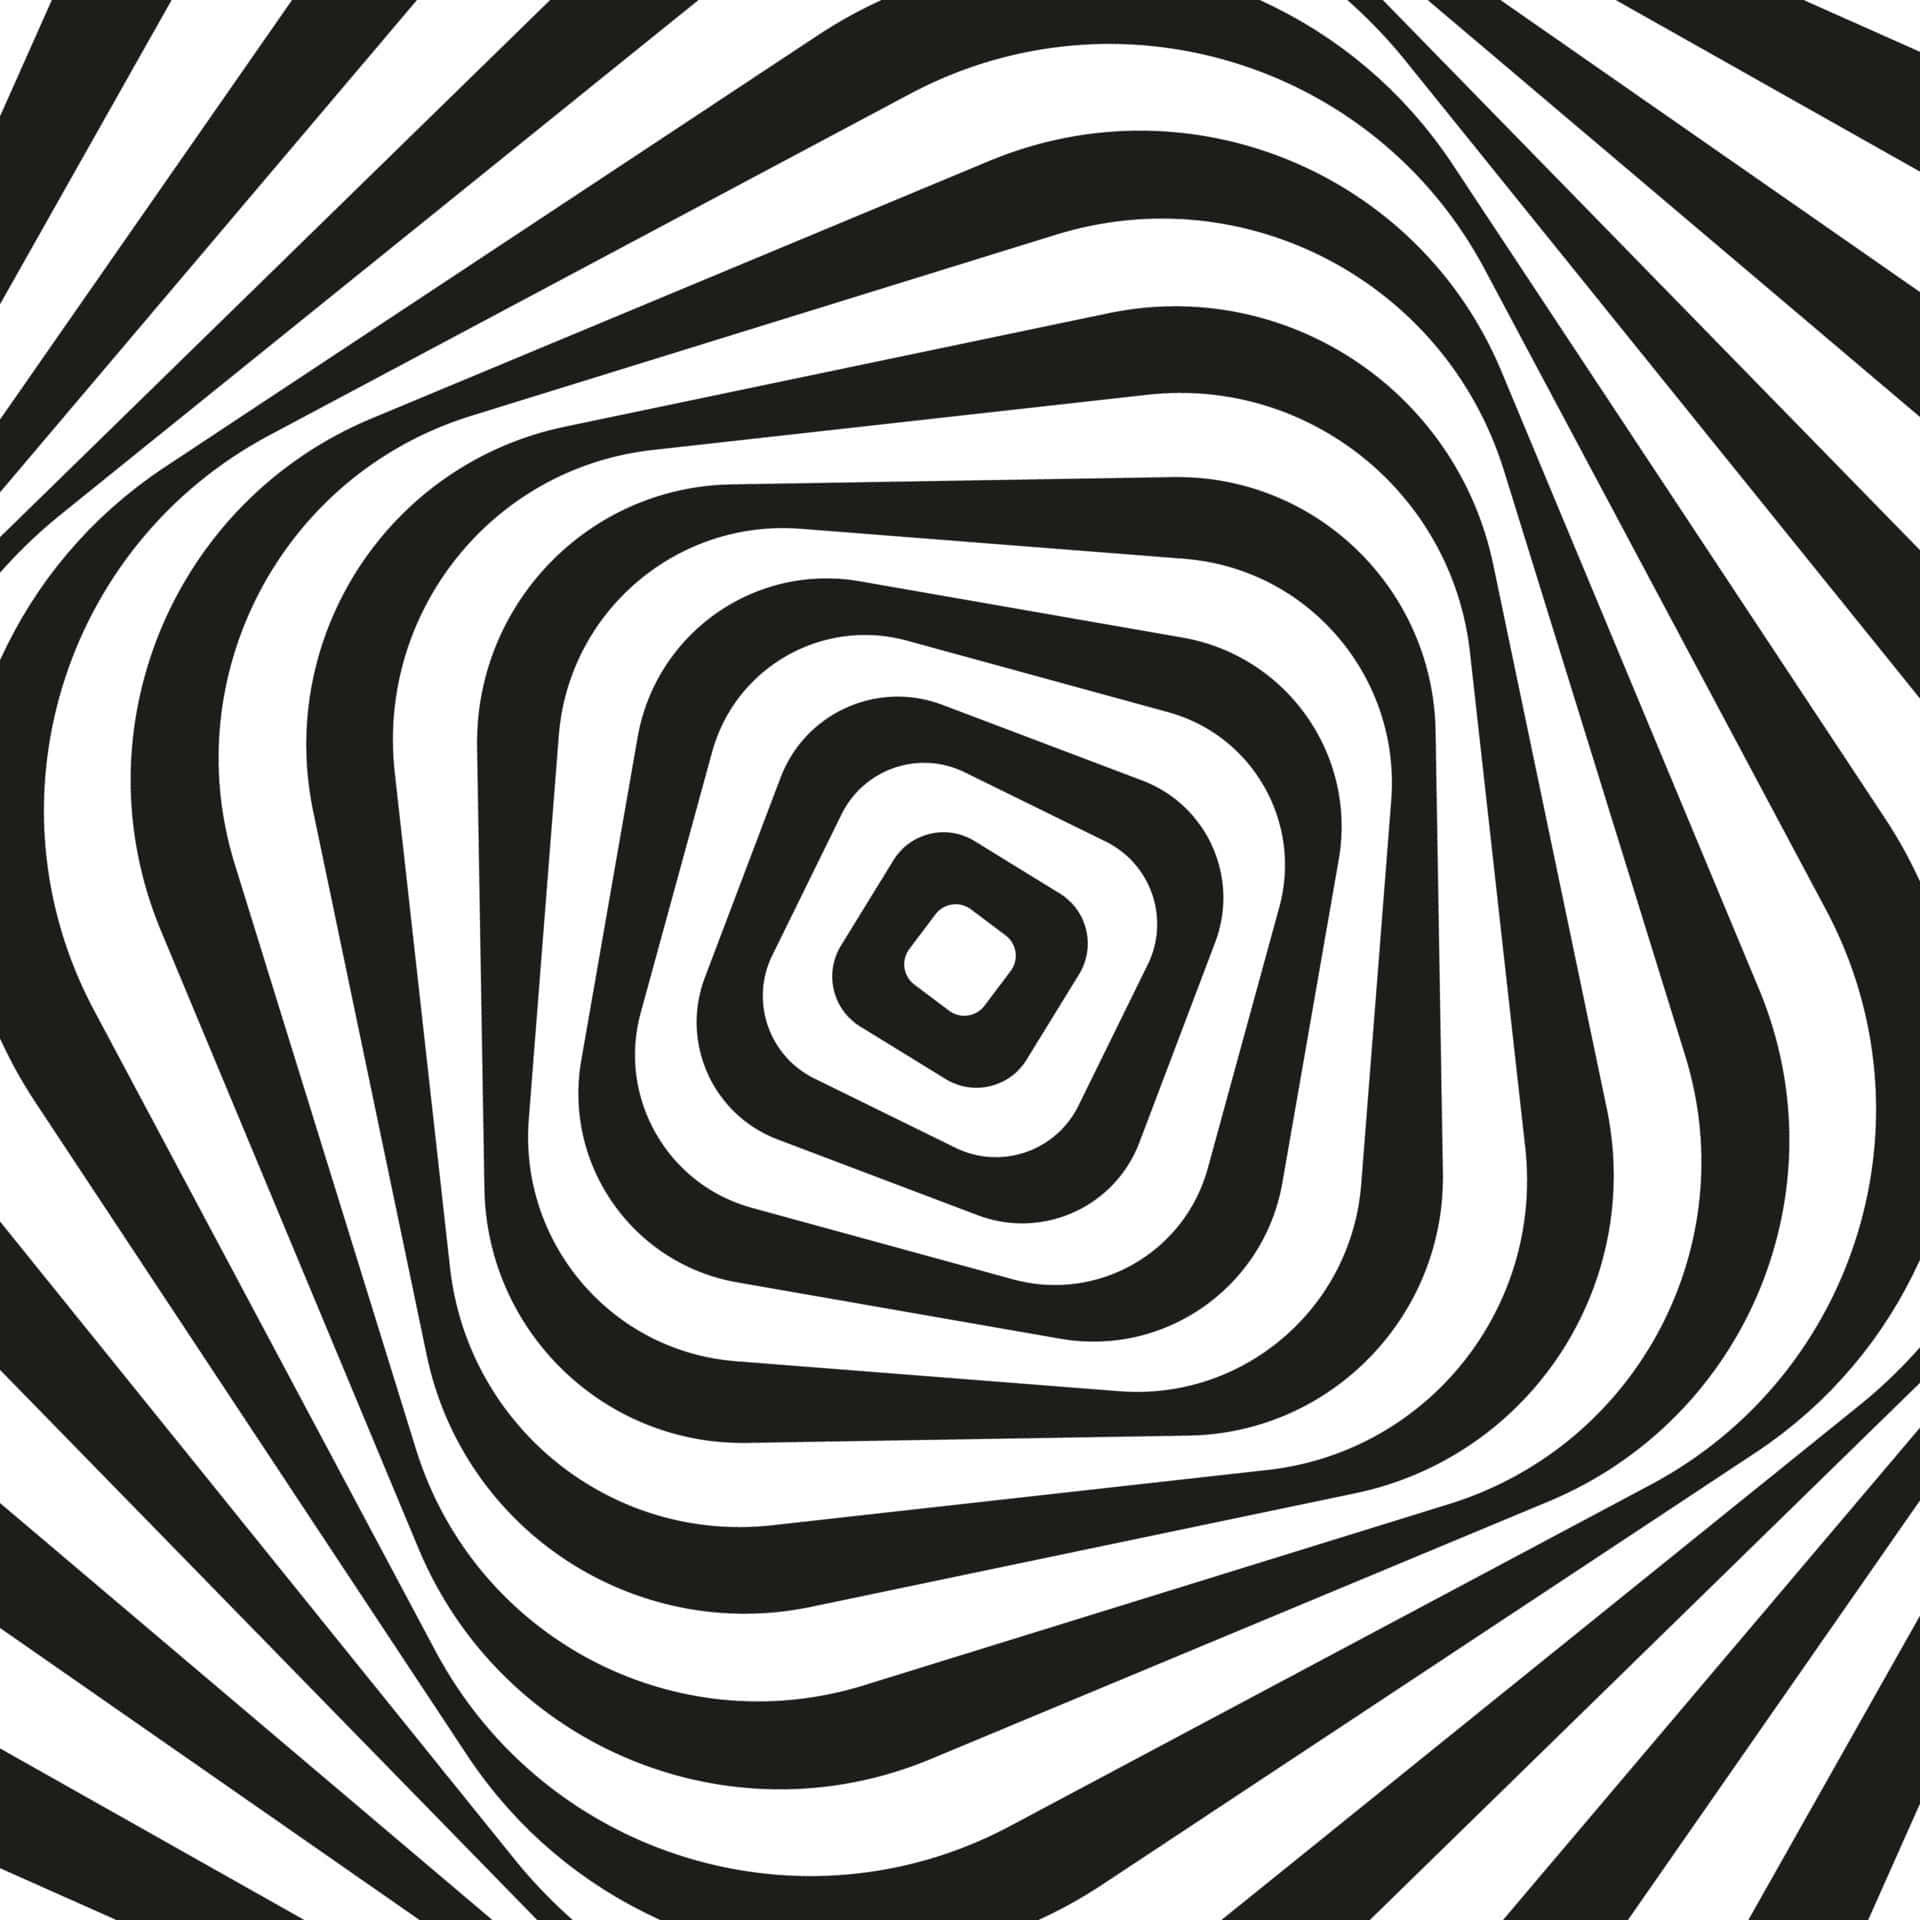 A Black And White Striped Pattern With A Spiral